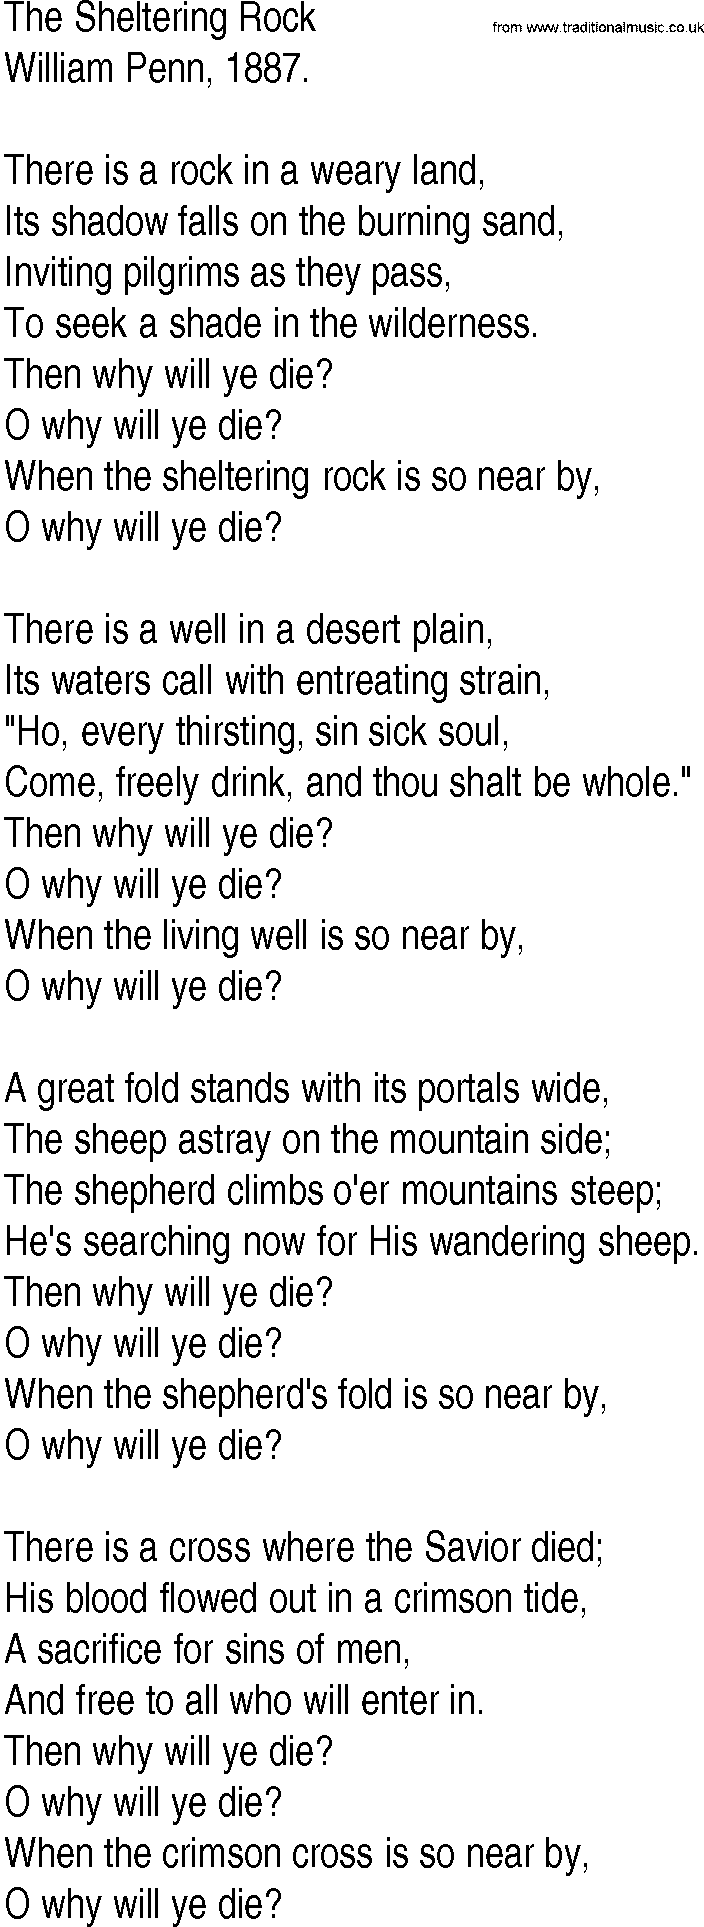 Hymn and Gospel Song: The Sheltering Rock by William Penn lyrics